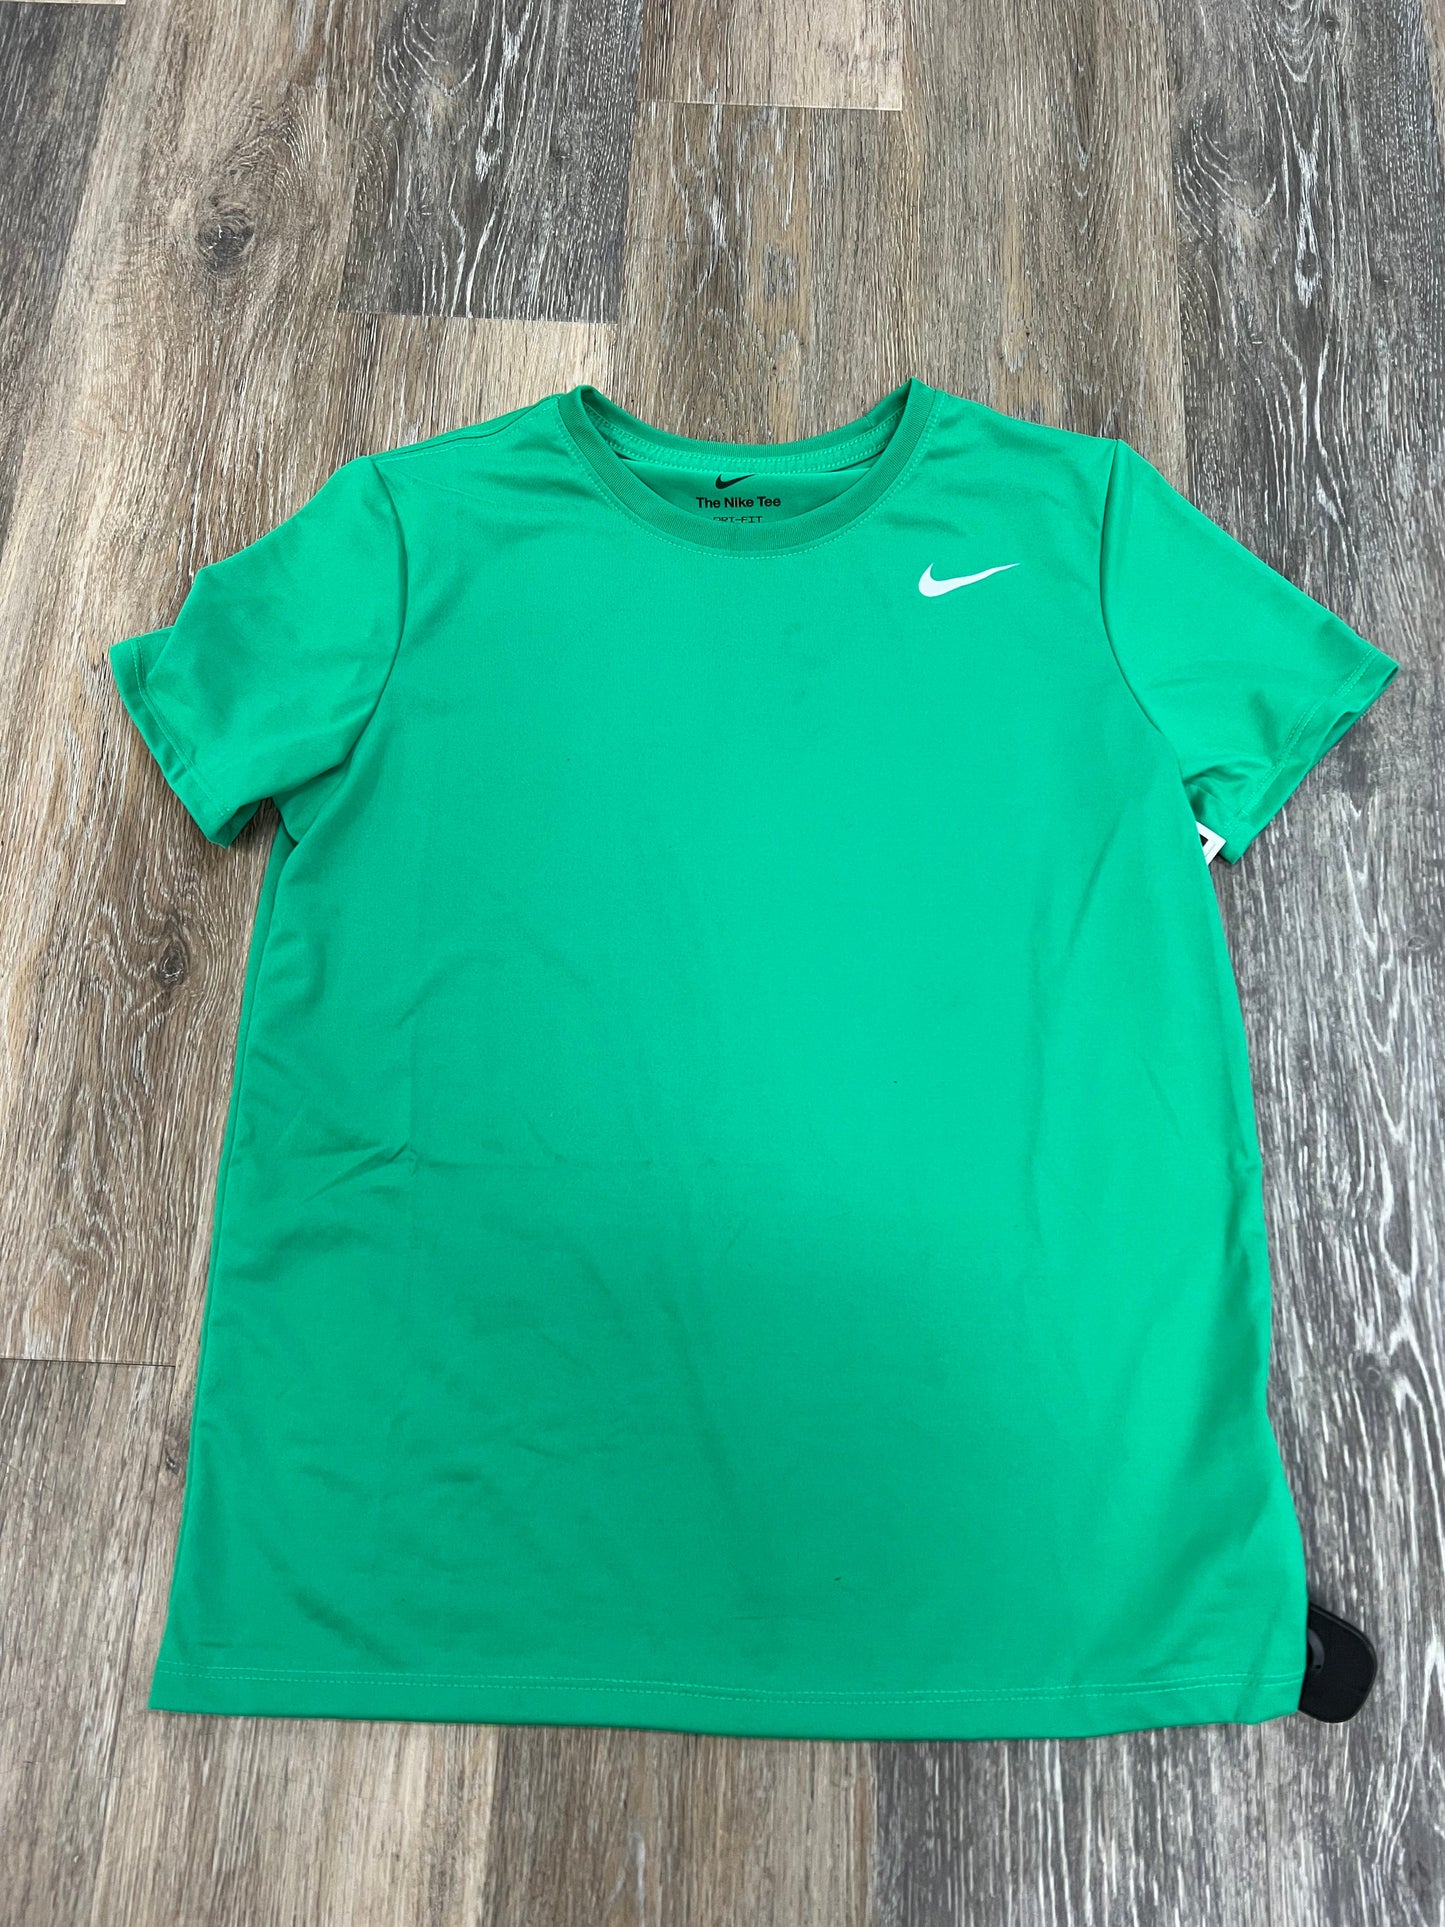 Green Athletic Top Short Sleeve Nike Apparel, Size S